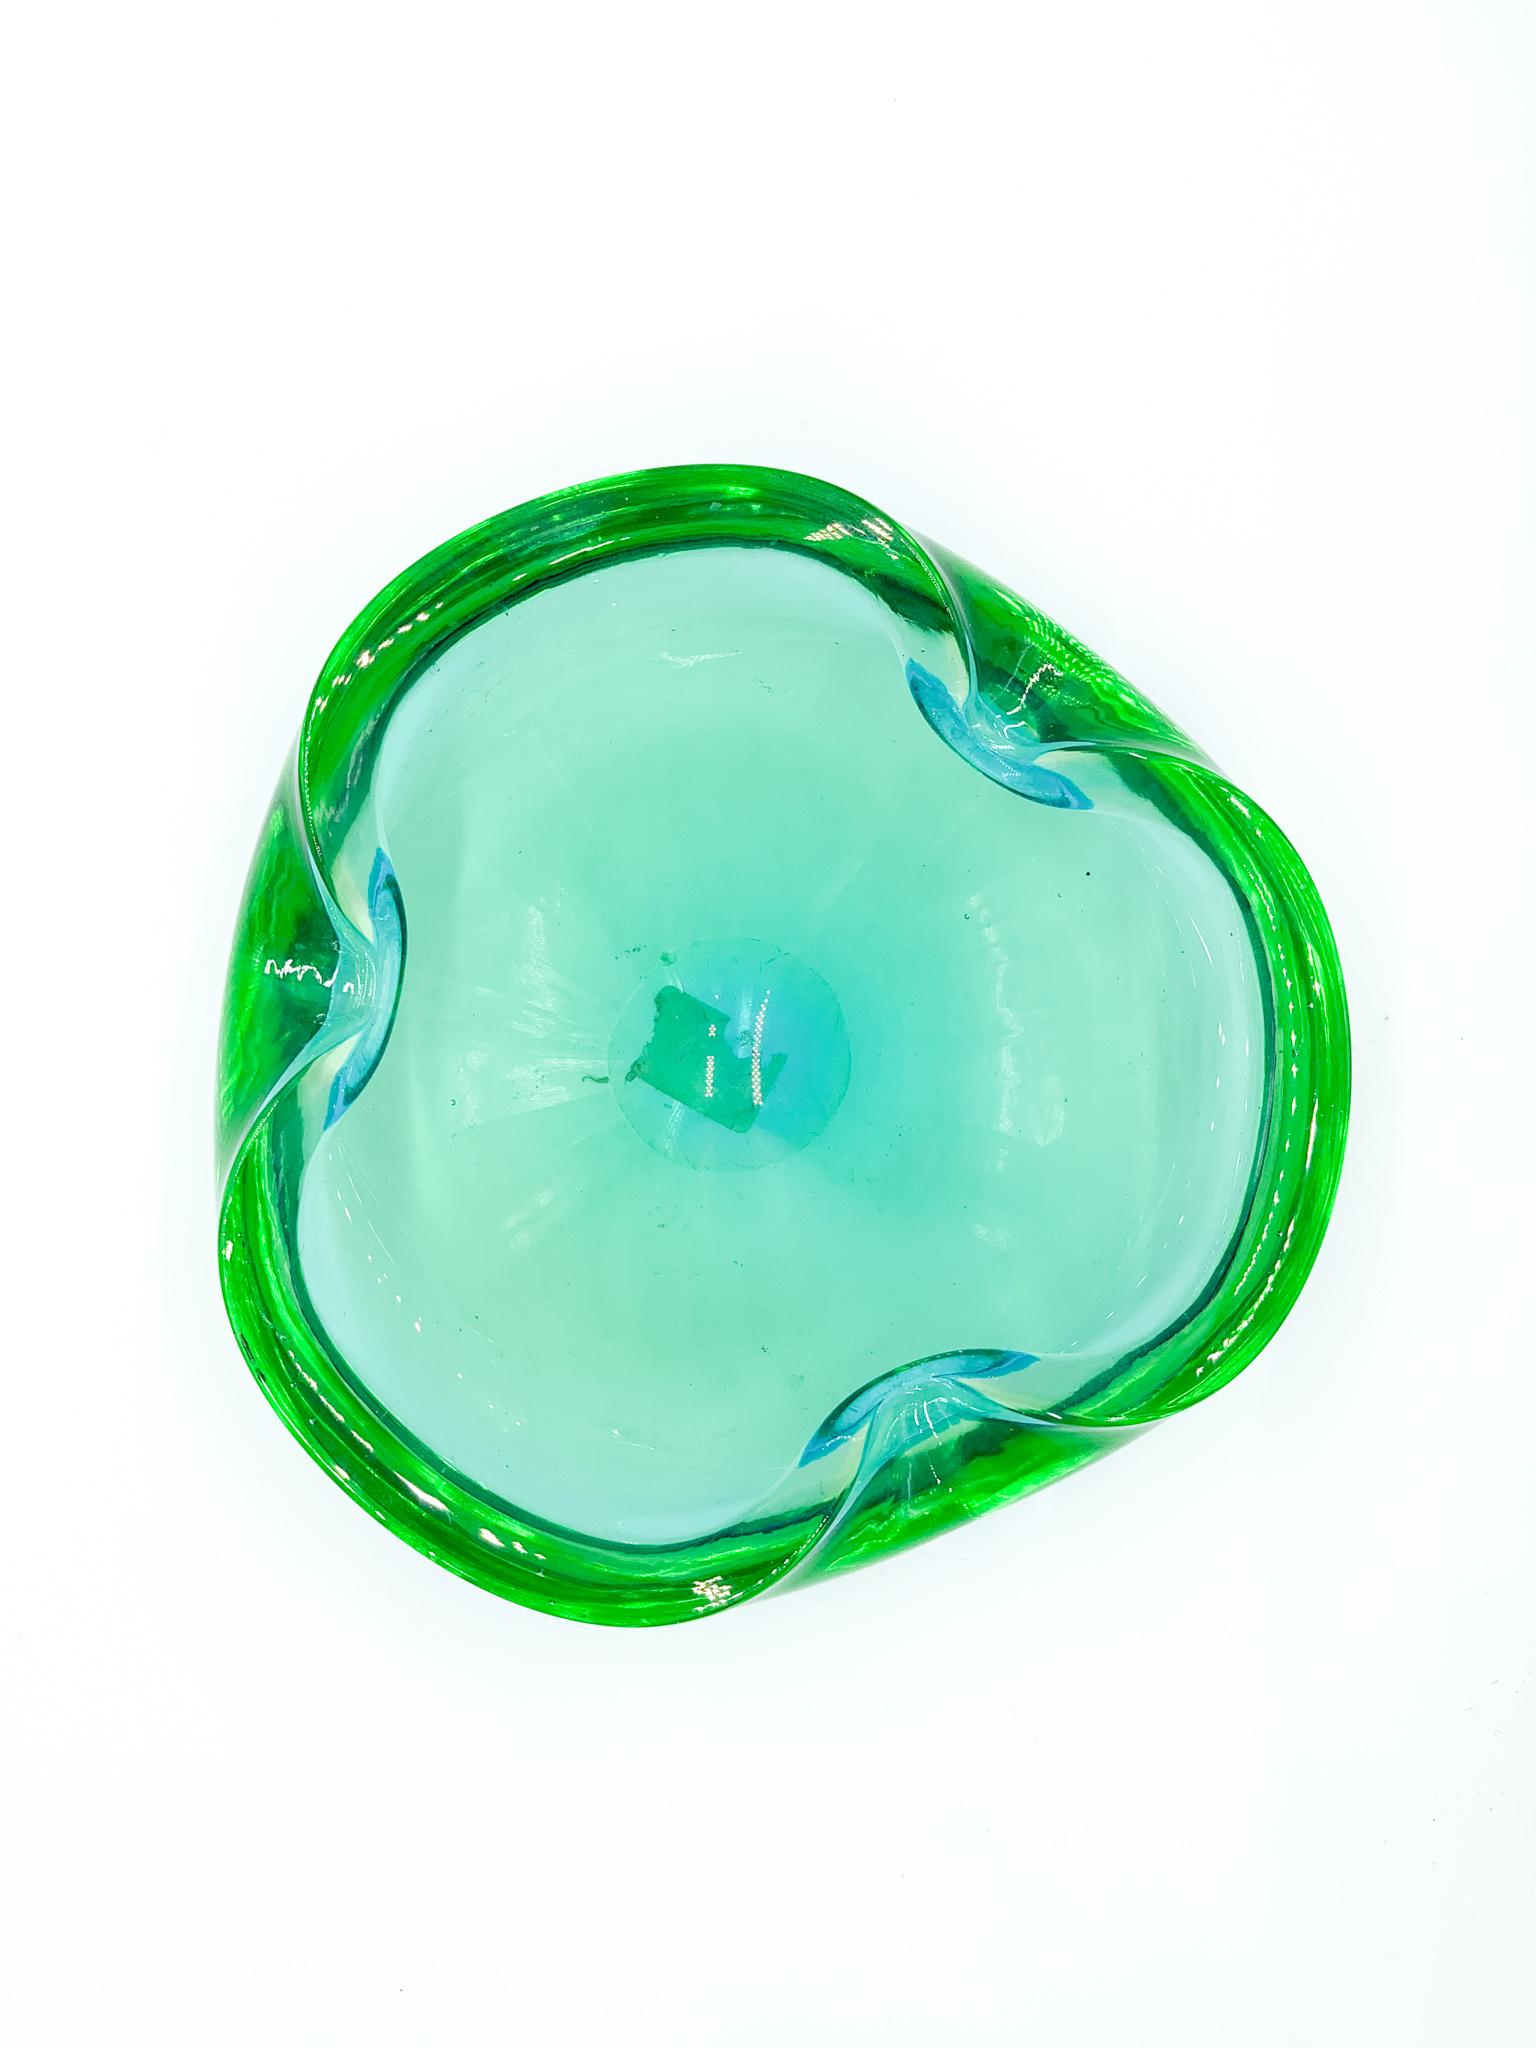 Mid-20th Century Green Murano Glass Ashtray with Blue Shades by Flavio Poli 1960s For Sale